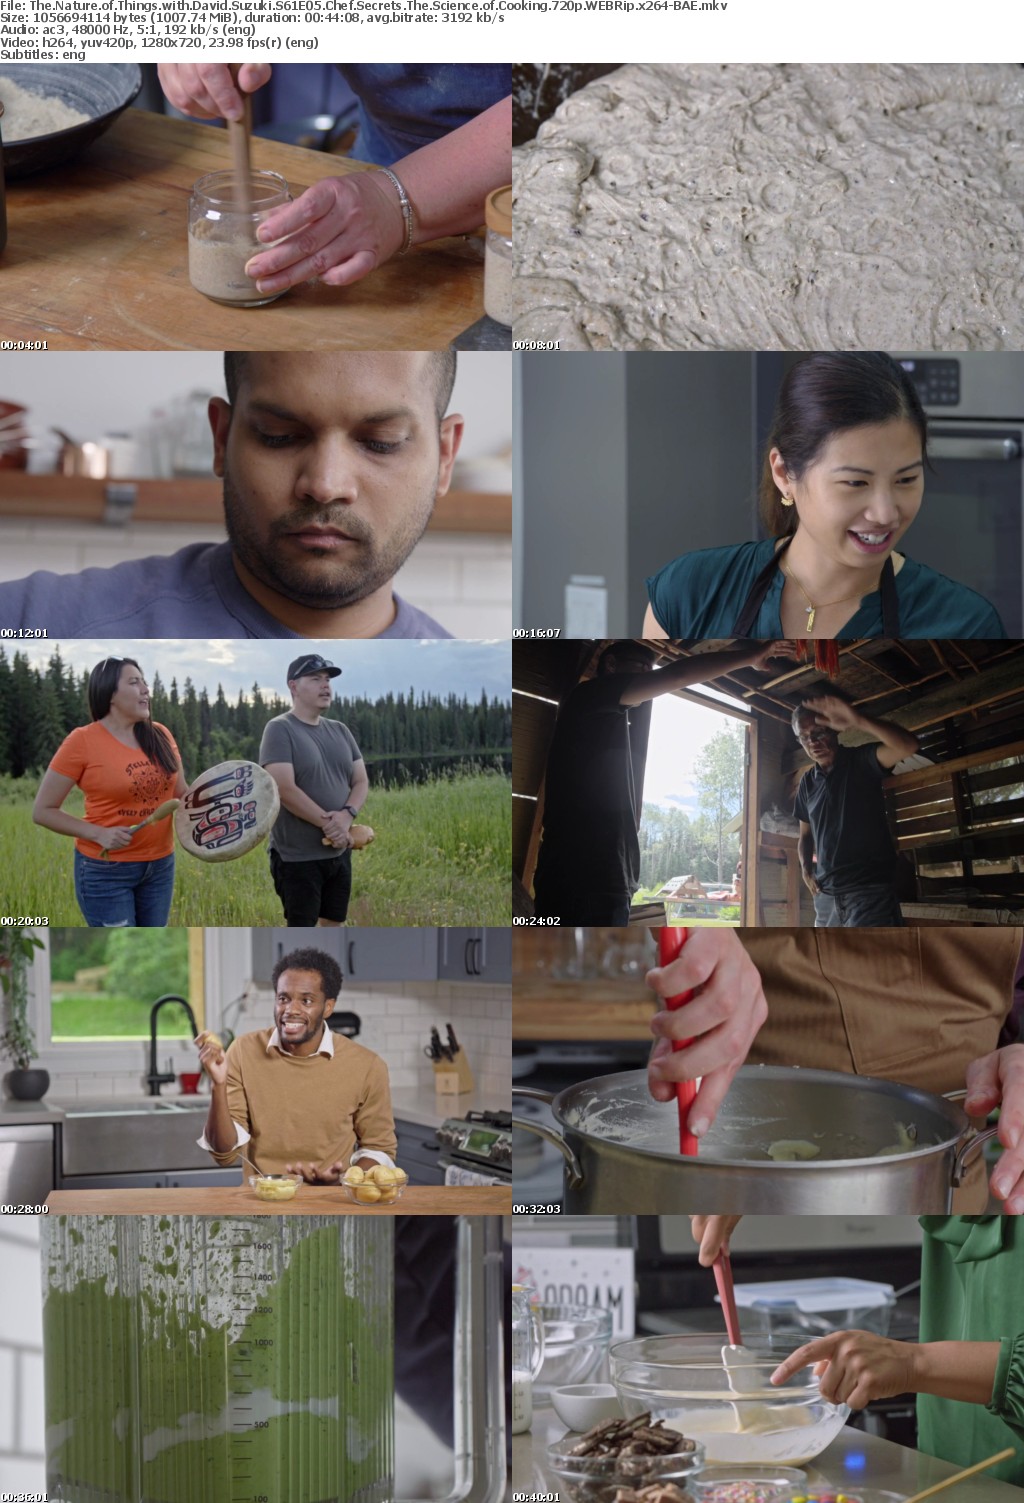 The Nature of Things with David Suzuki S61E05 Chef Secrets The Science of Cooking 720p WEBRip x264-BAE